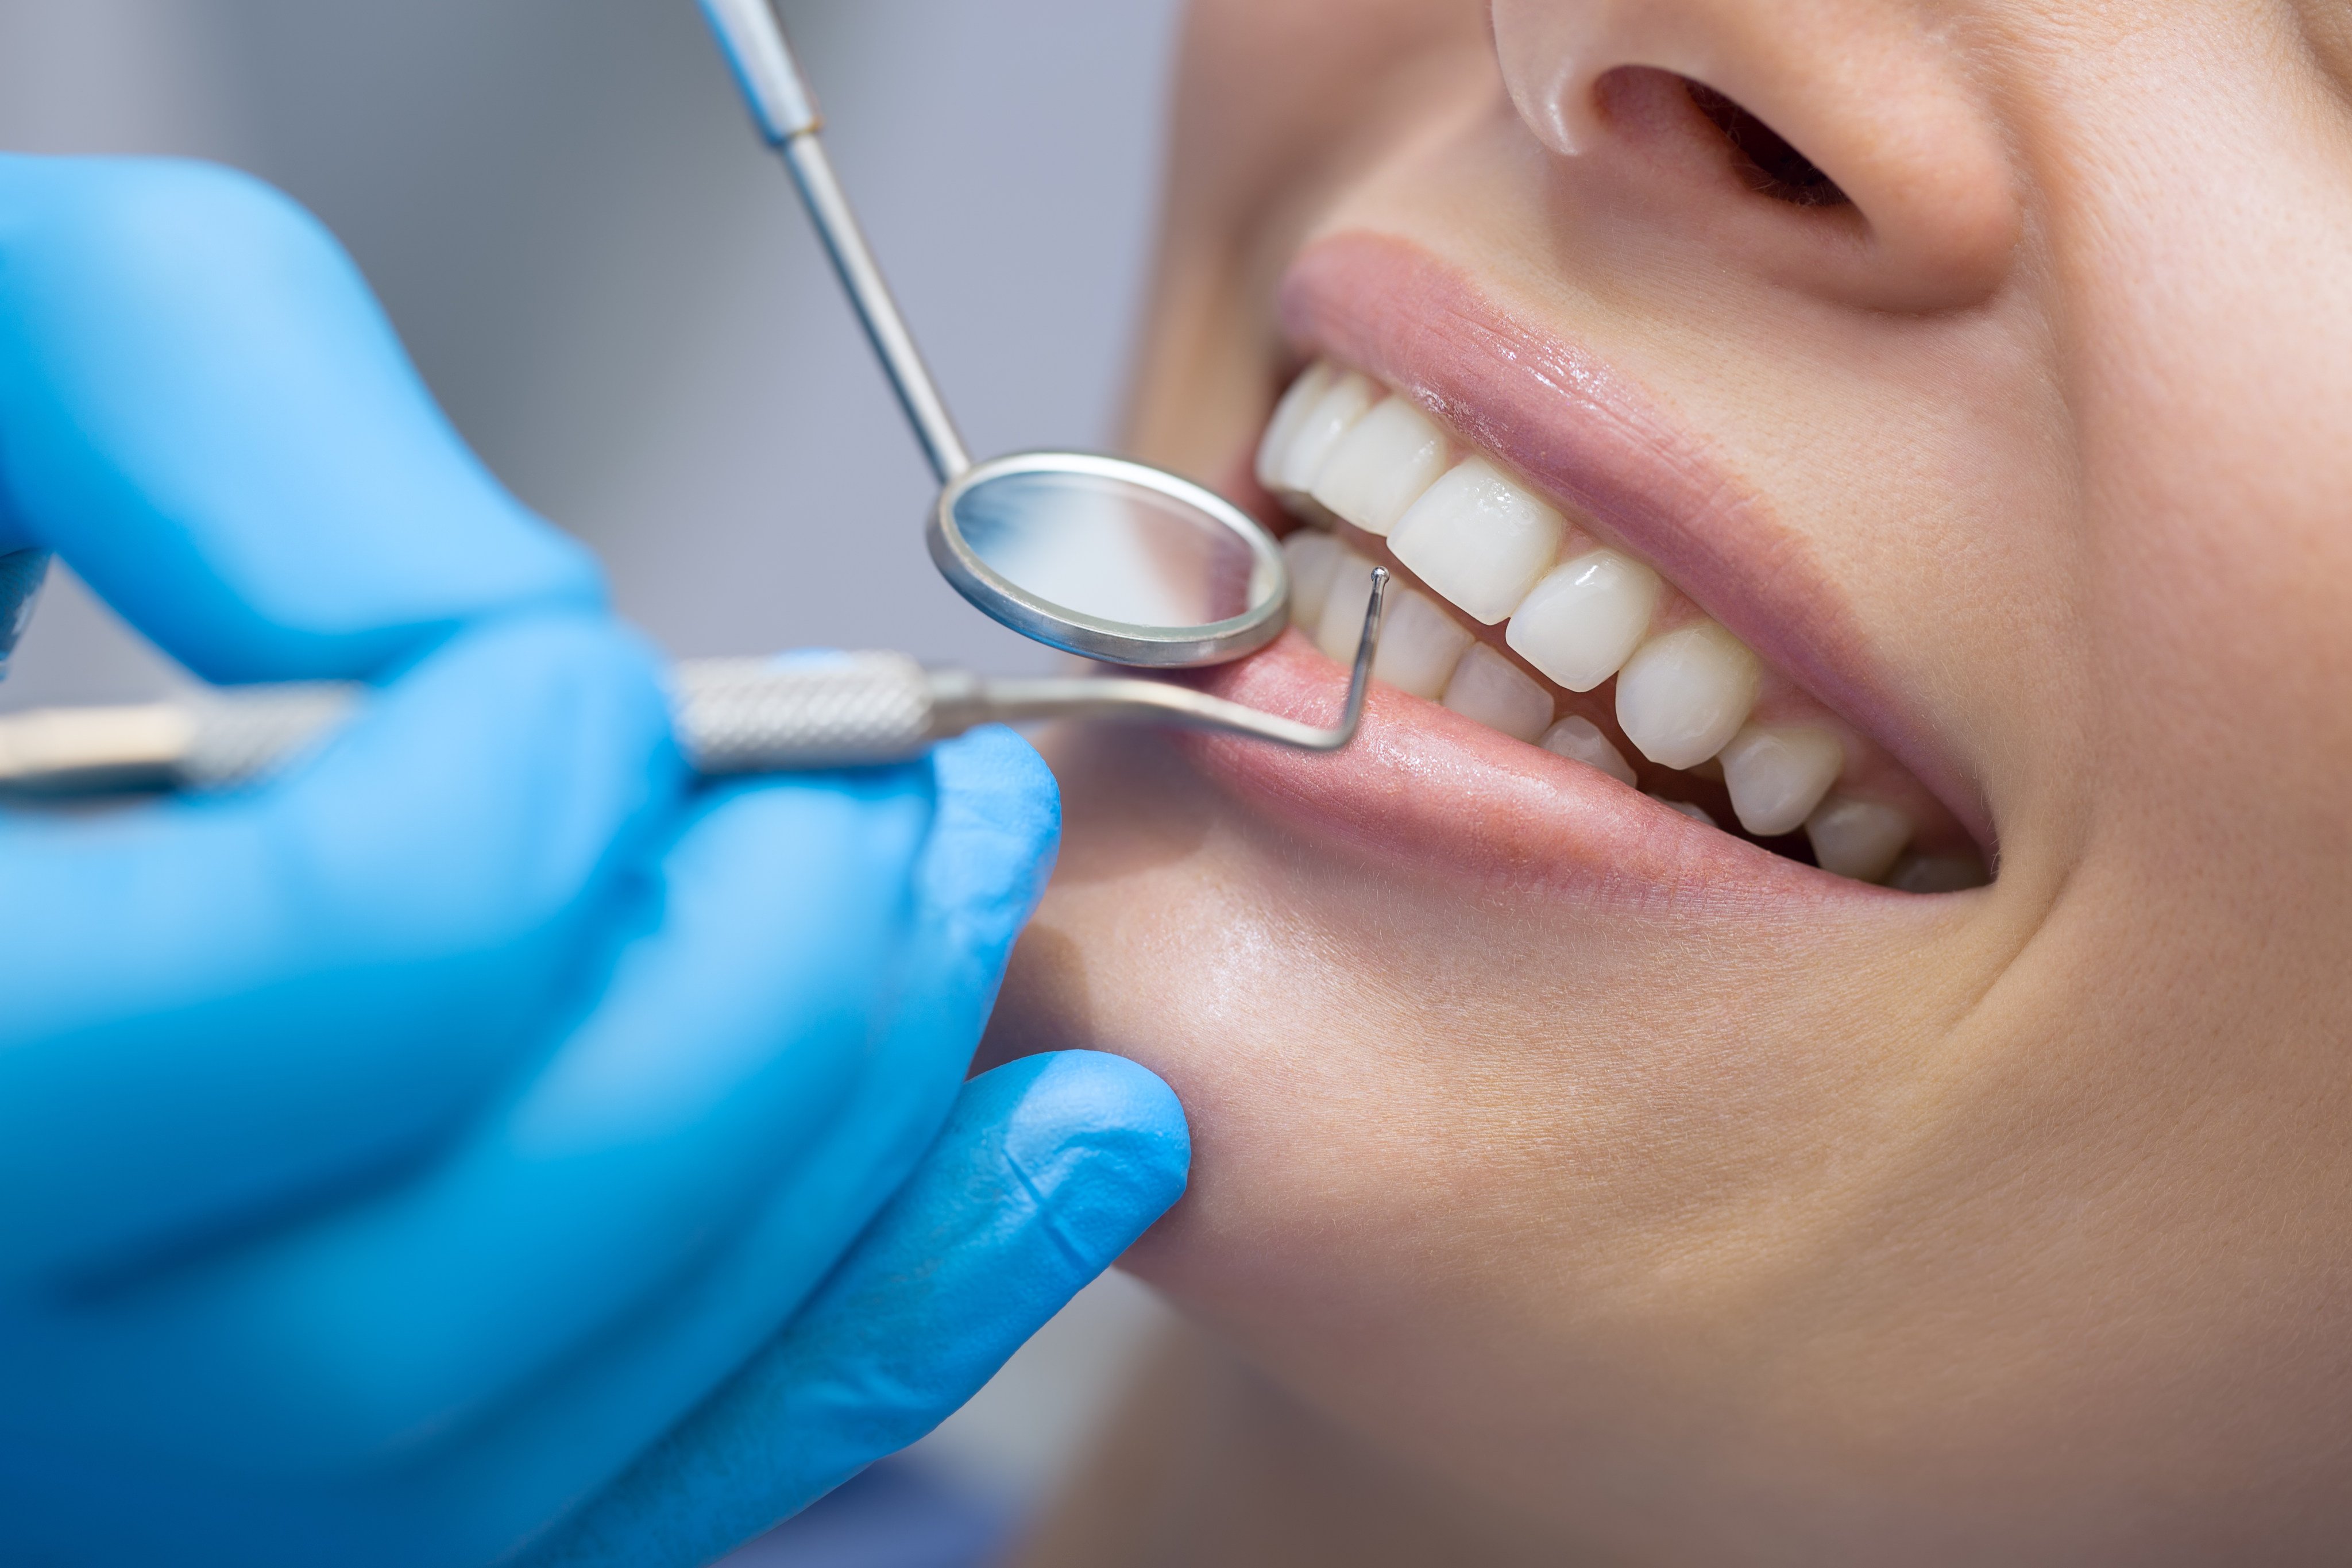 Hong Kong is currently grappling with a shortage of dentists, particularly in the public sector. Photo: Shutterstock